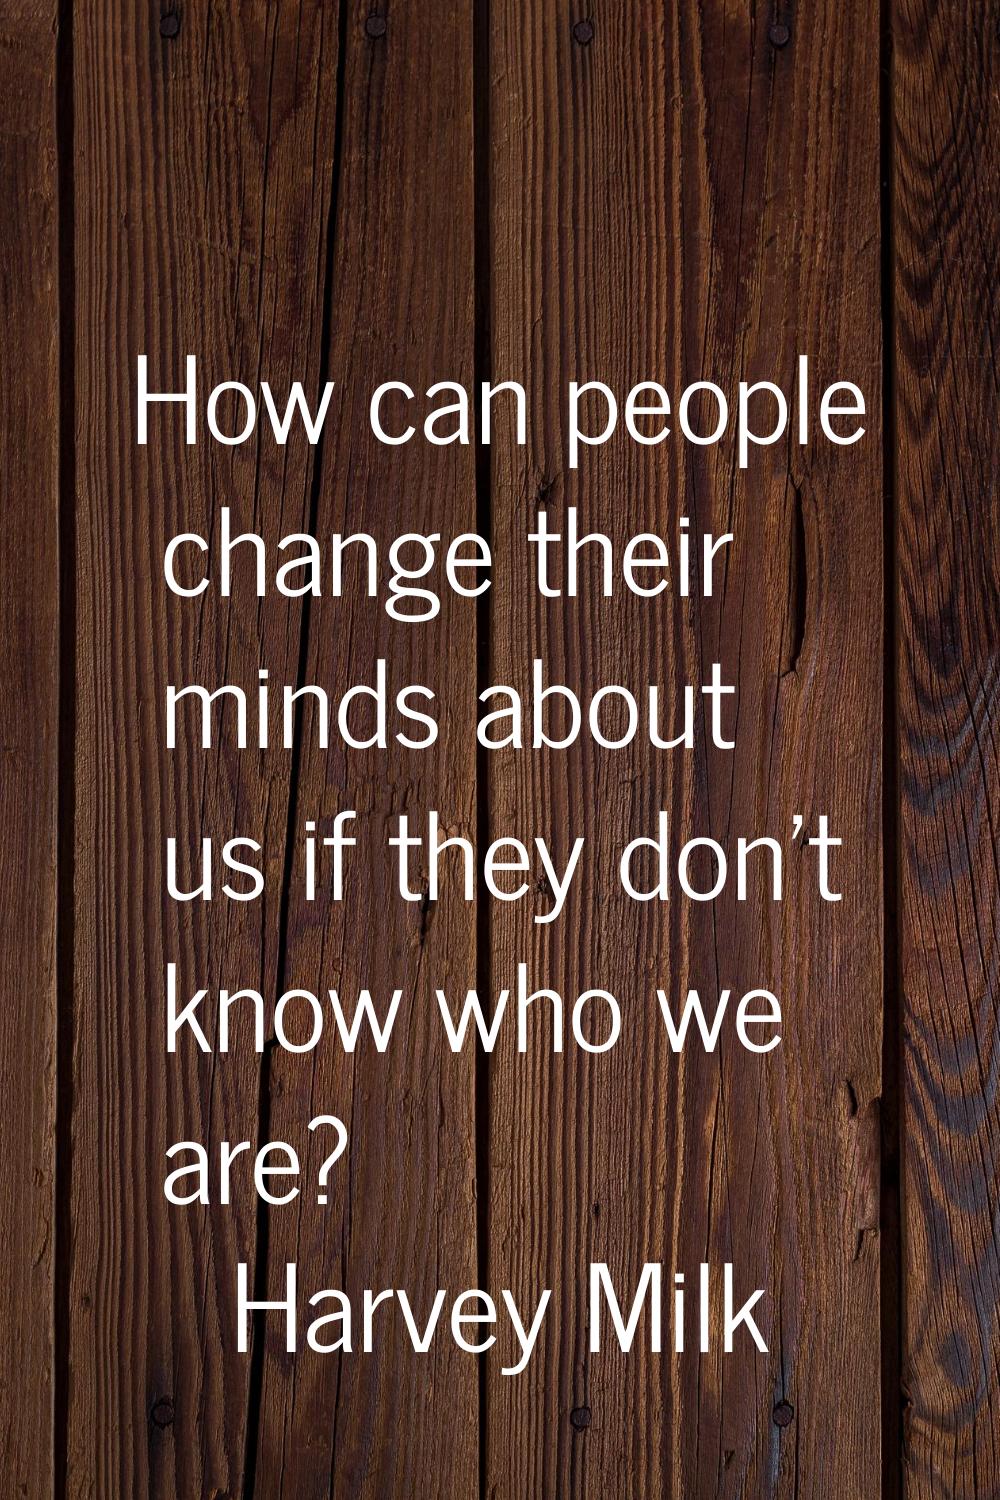 How can people change their minds about us if they don't know who we are?